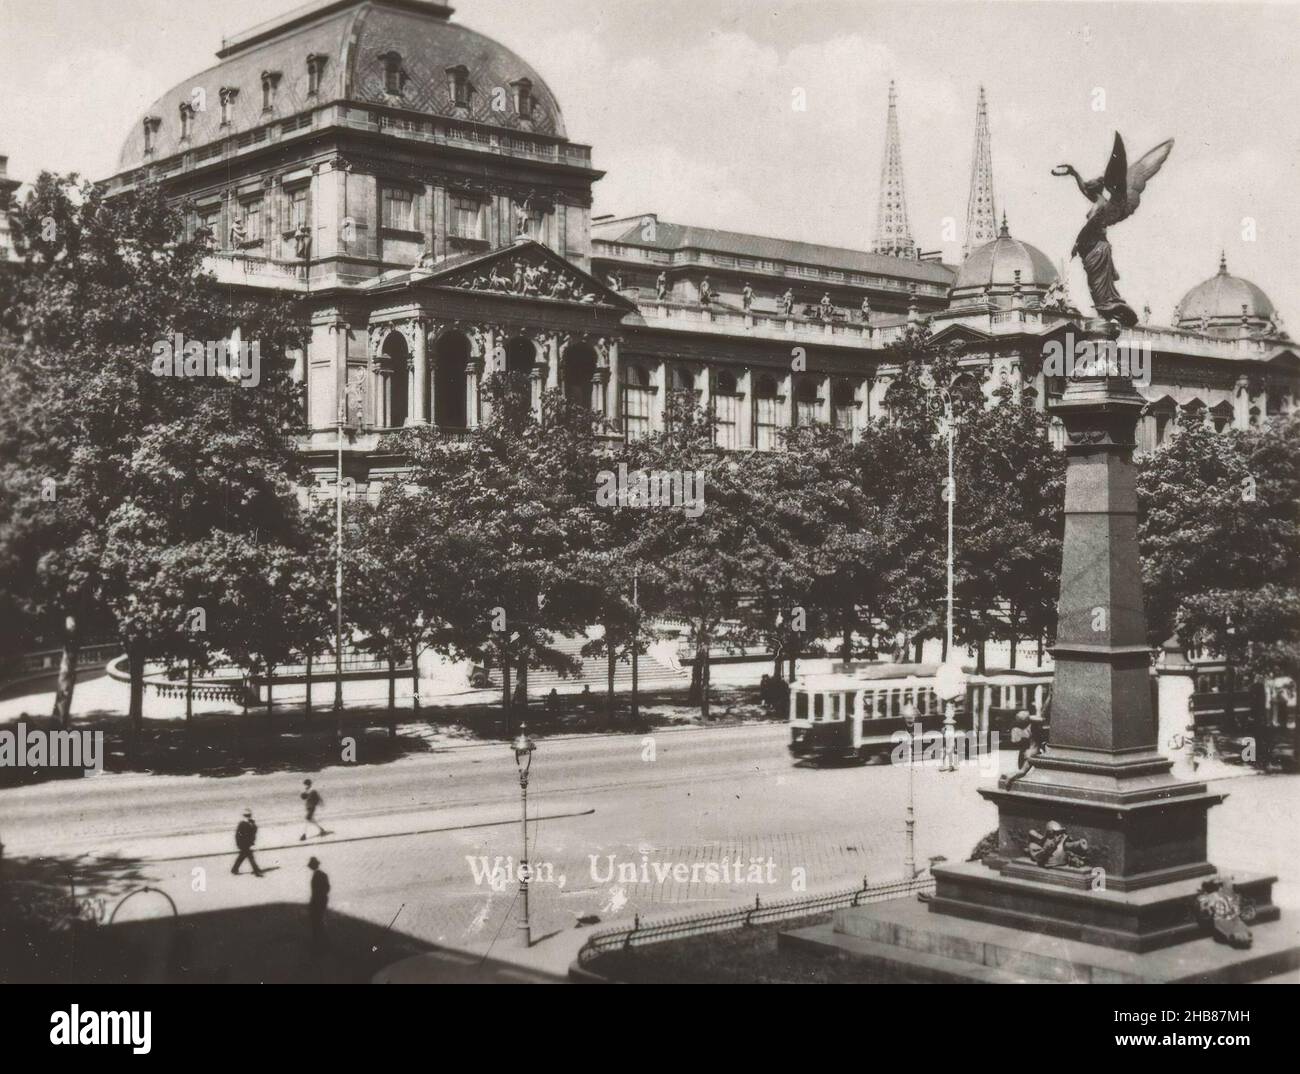 View of a university building in Vienna, Wien, Universität (title on object), anonymous, Vienna, c. 1950 - c. 1960, photographic support, gelatin silver print, height 62 mm × width 82 mm Stock Photo